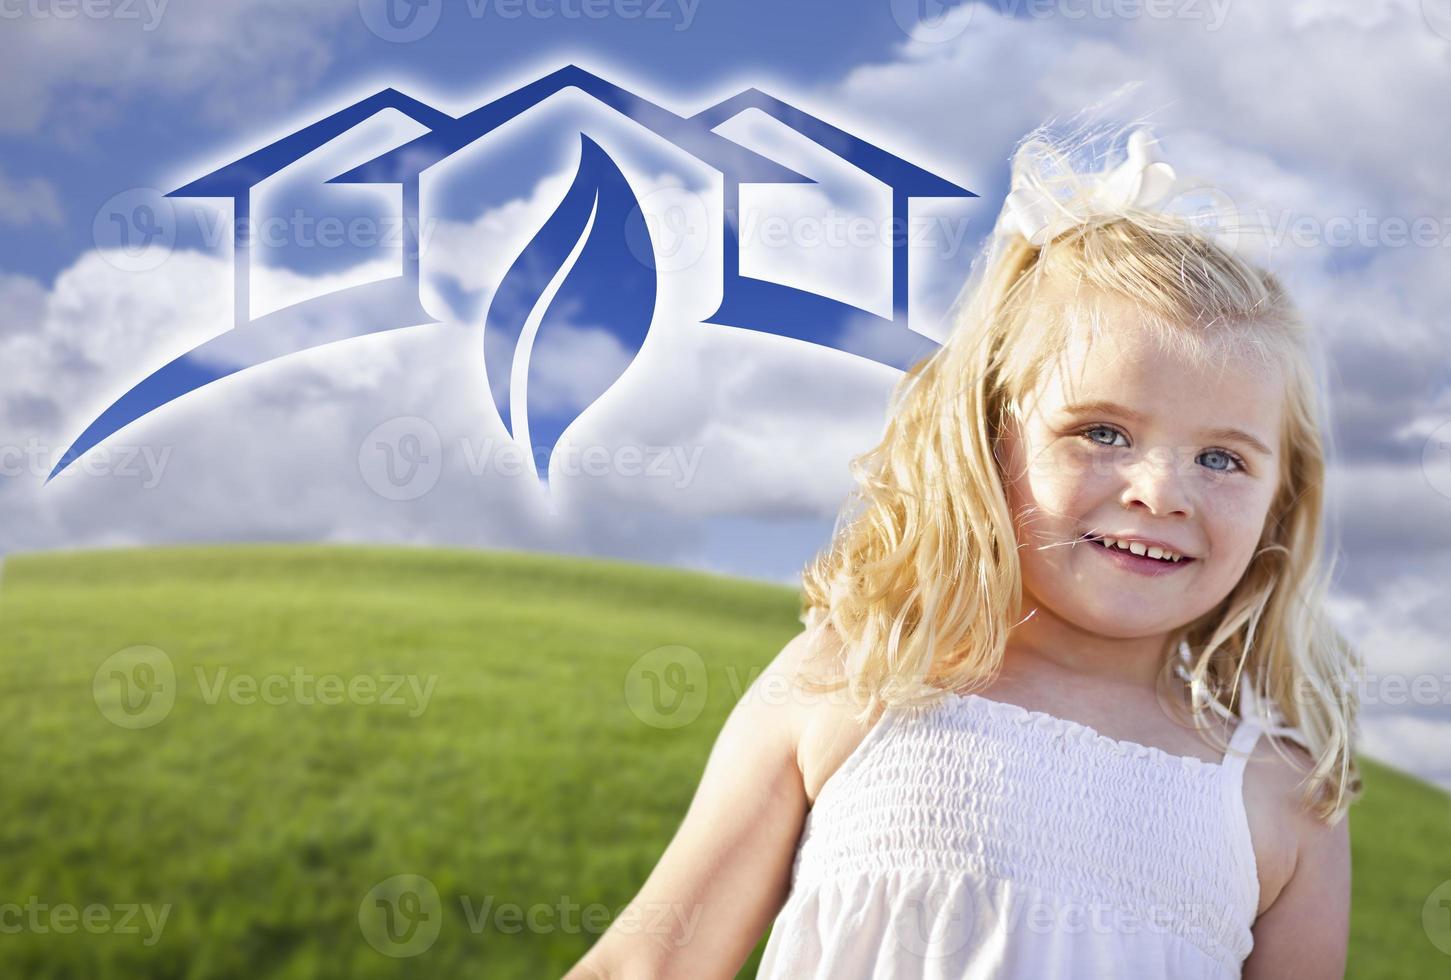 Blue Eyed Girl Playing Outside with Ghosted Green House Graphic photo